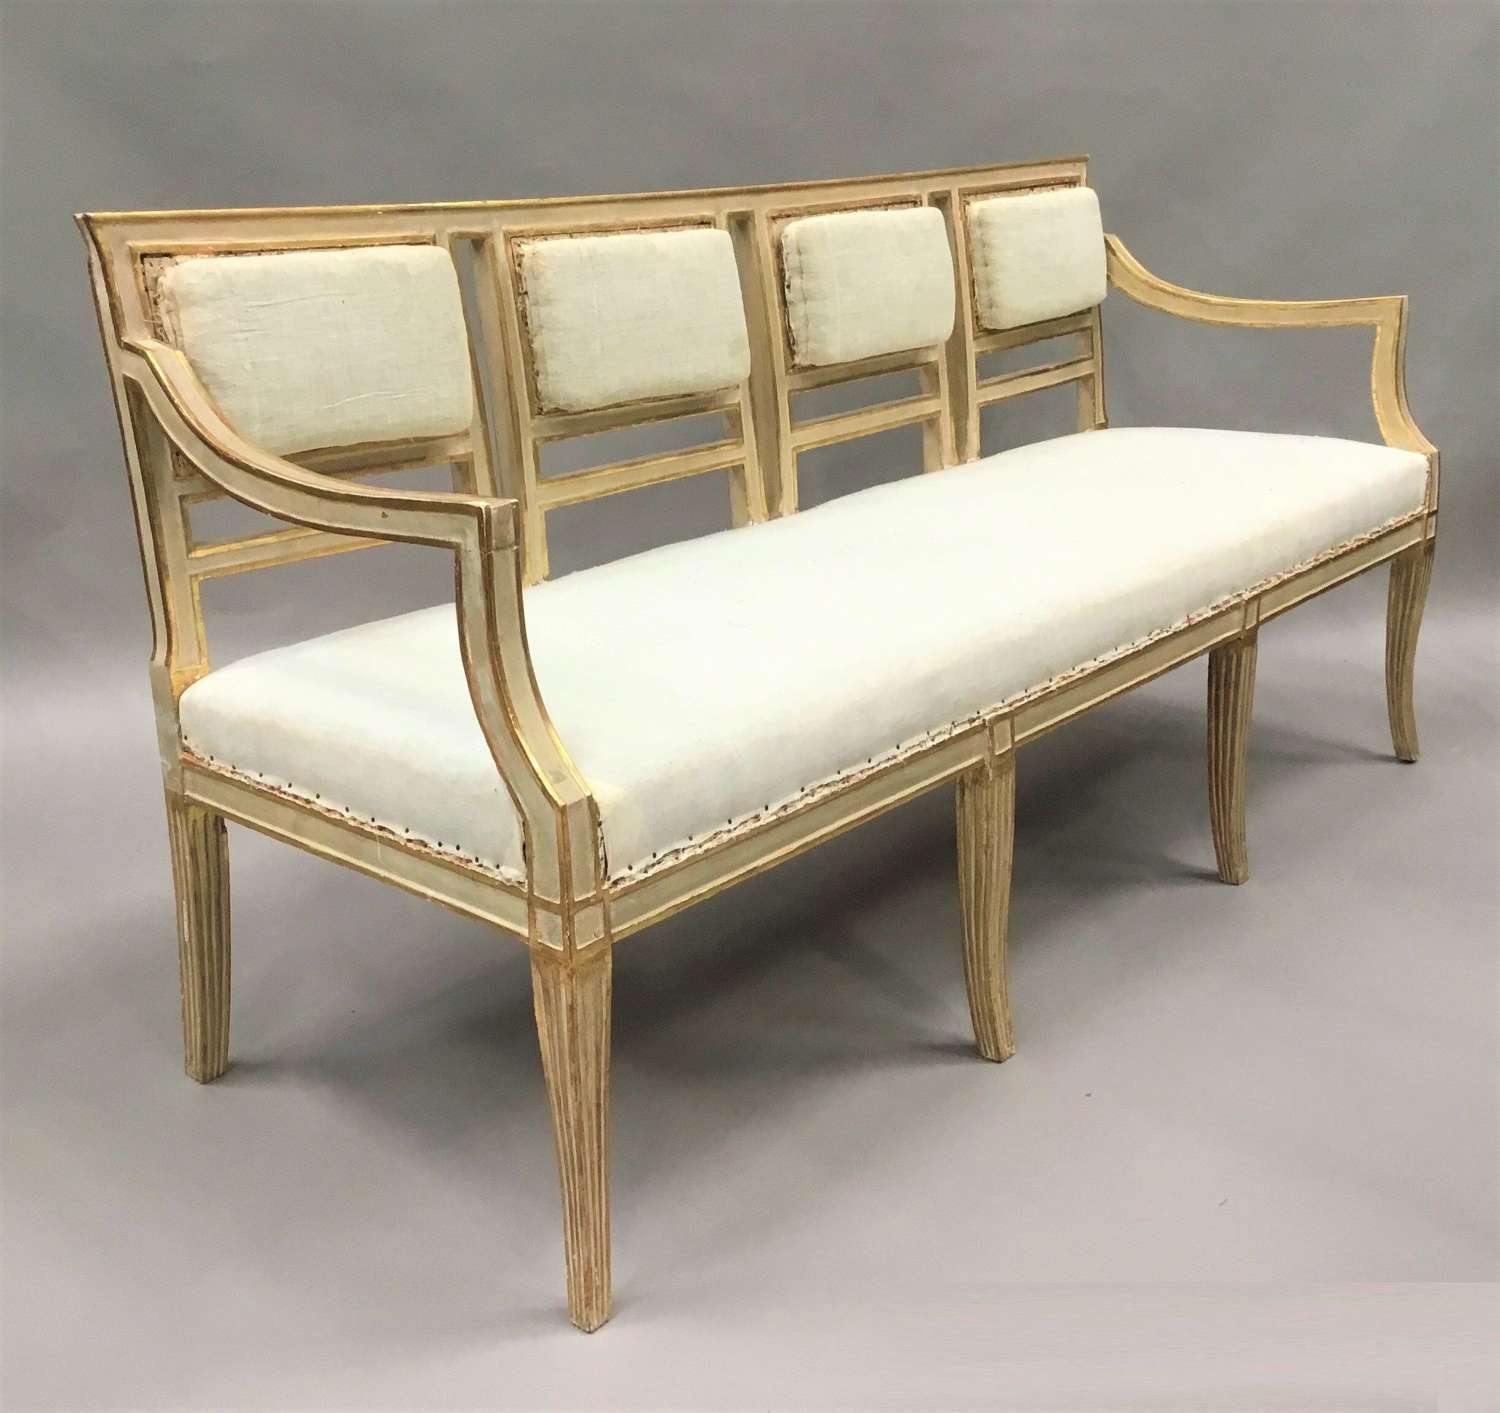 C19th Italian painted and parcel gilt settee